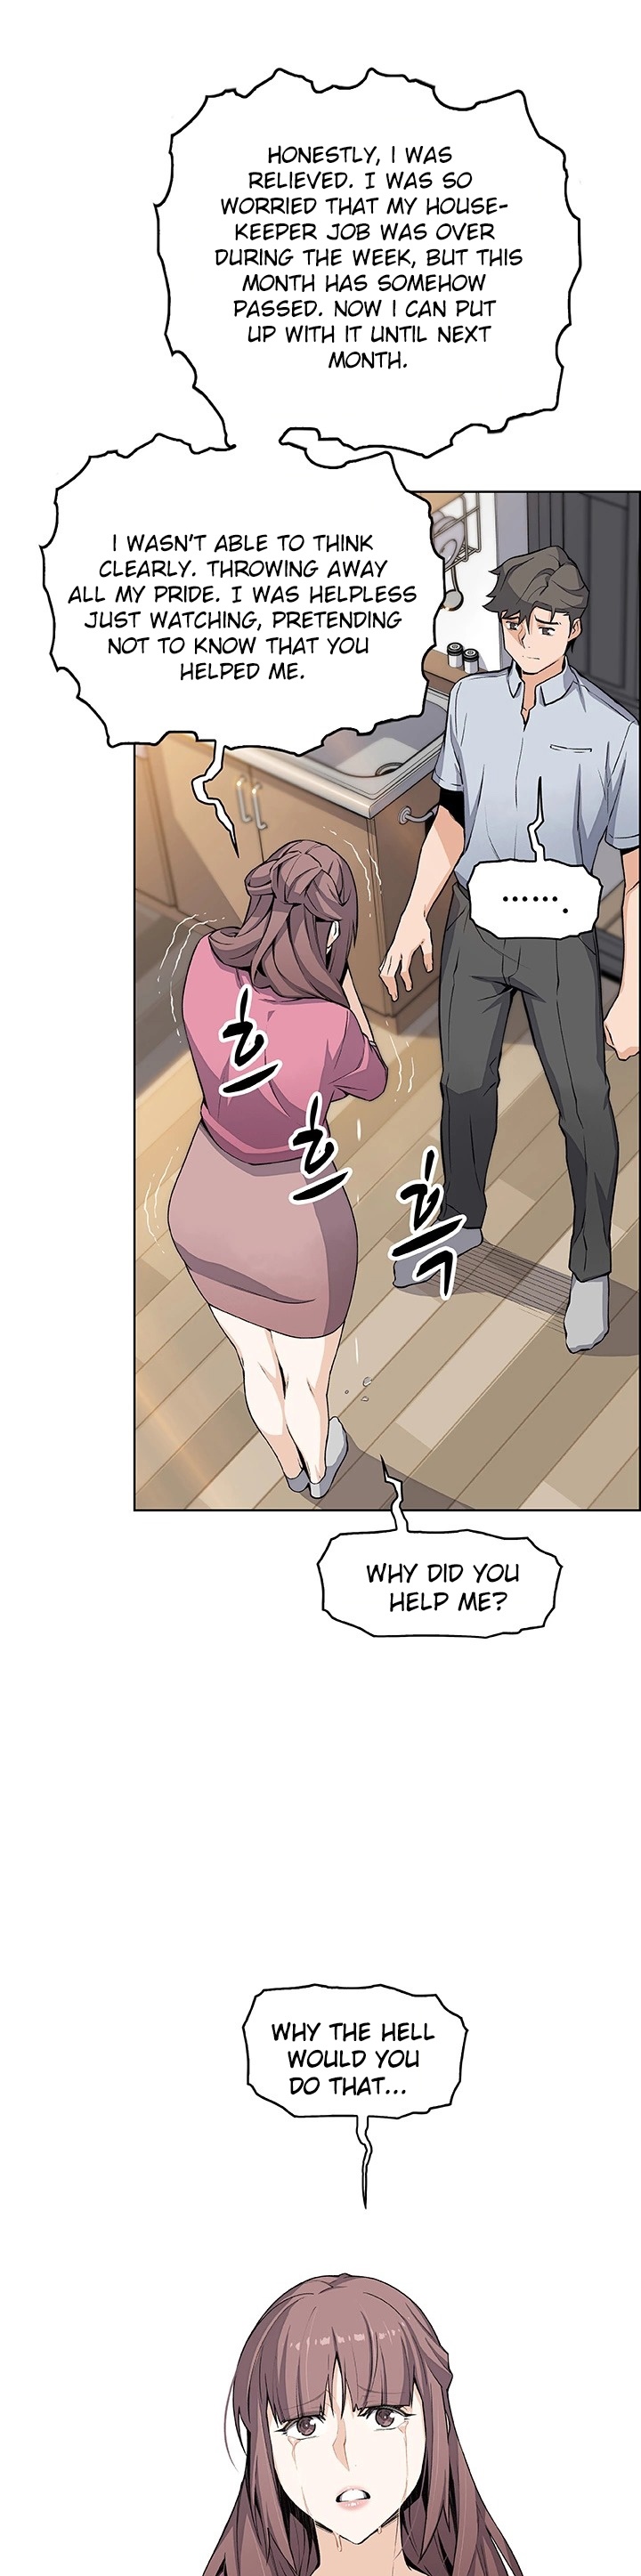 Housekeeper Manhwa - Chapter 22 Page 15